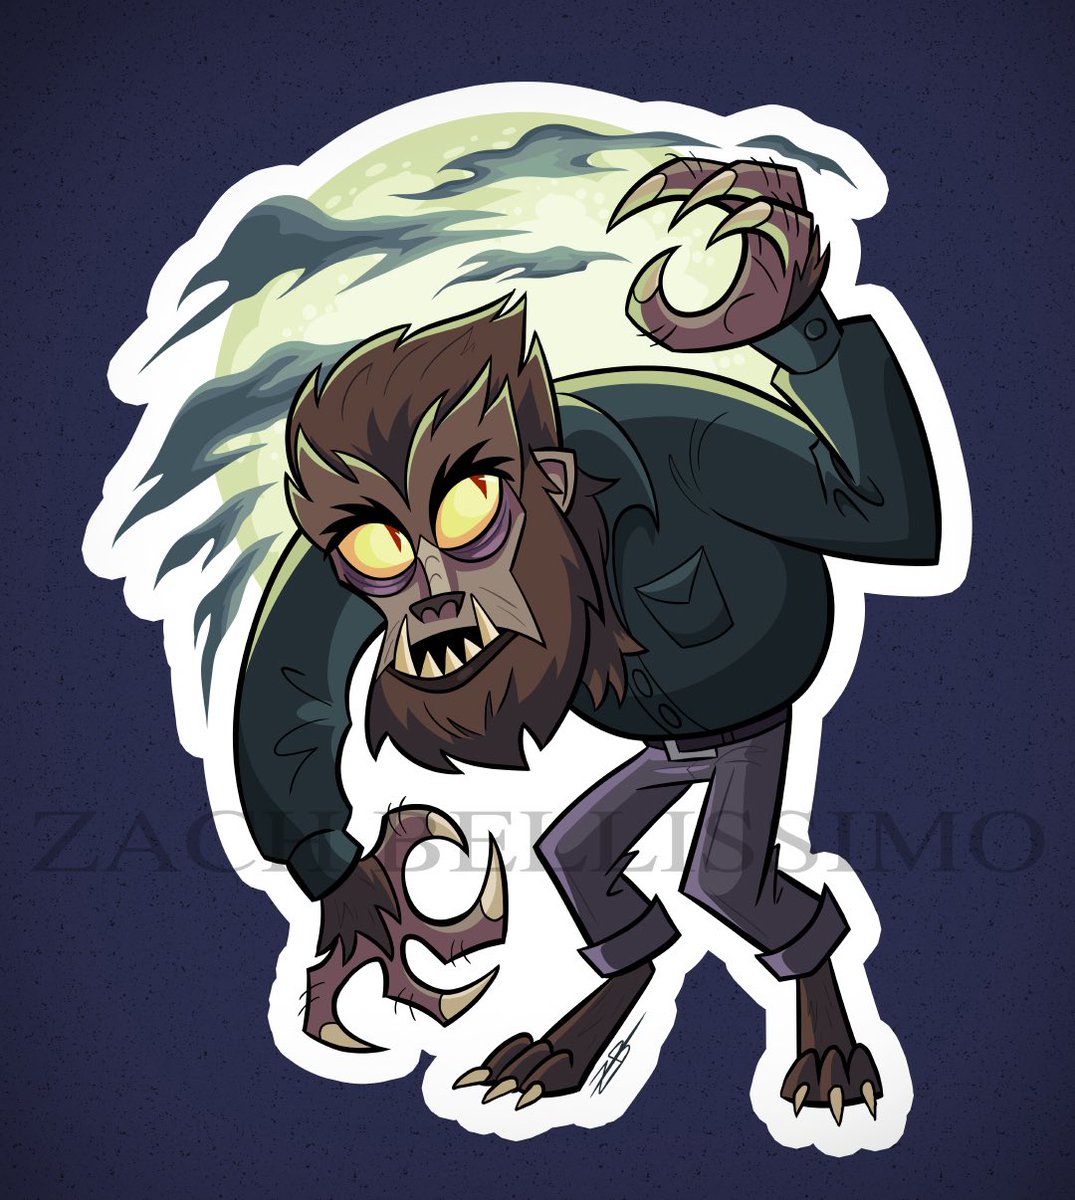 THE WOLF MAN (1941) Die Cut Sticker 🐺 Only available at MONSTERPALOOZA, booth 176 in section “Bride”, May 31st- June 2nd in Pasadena!